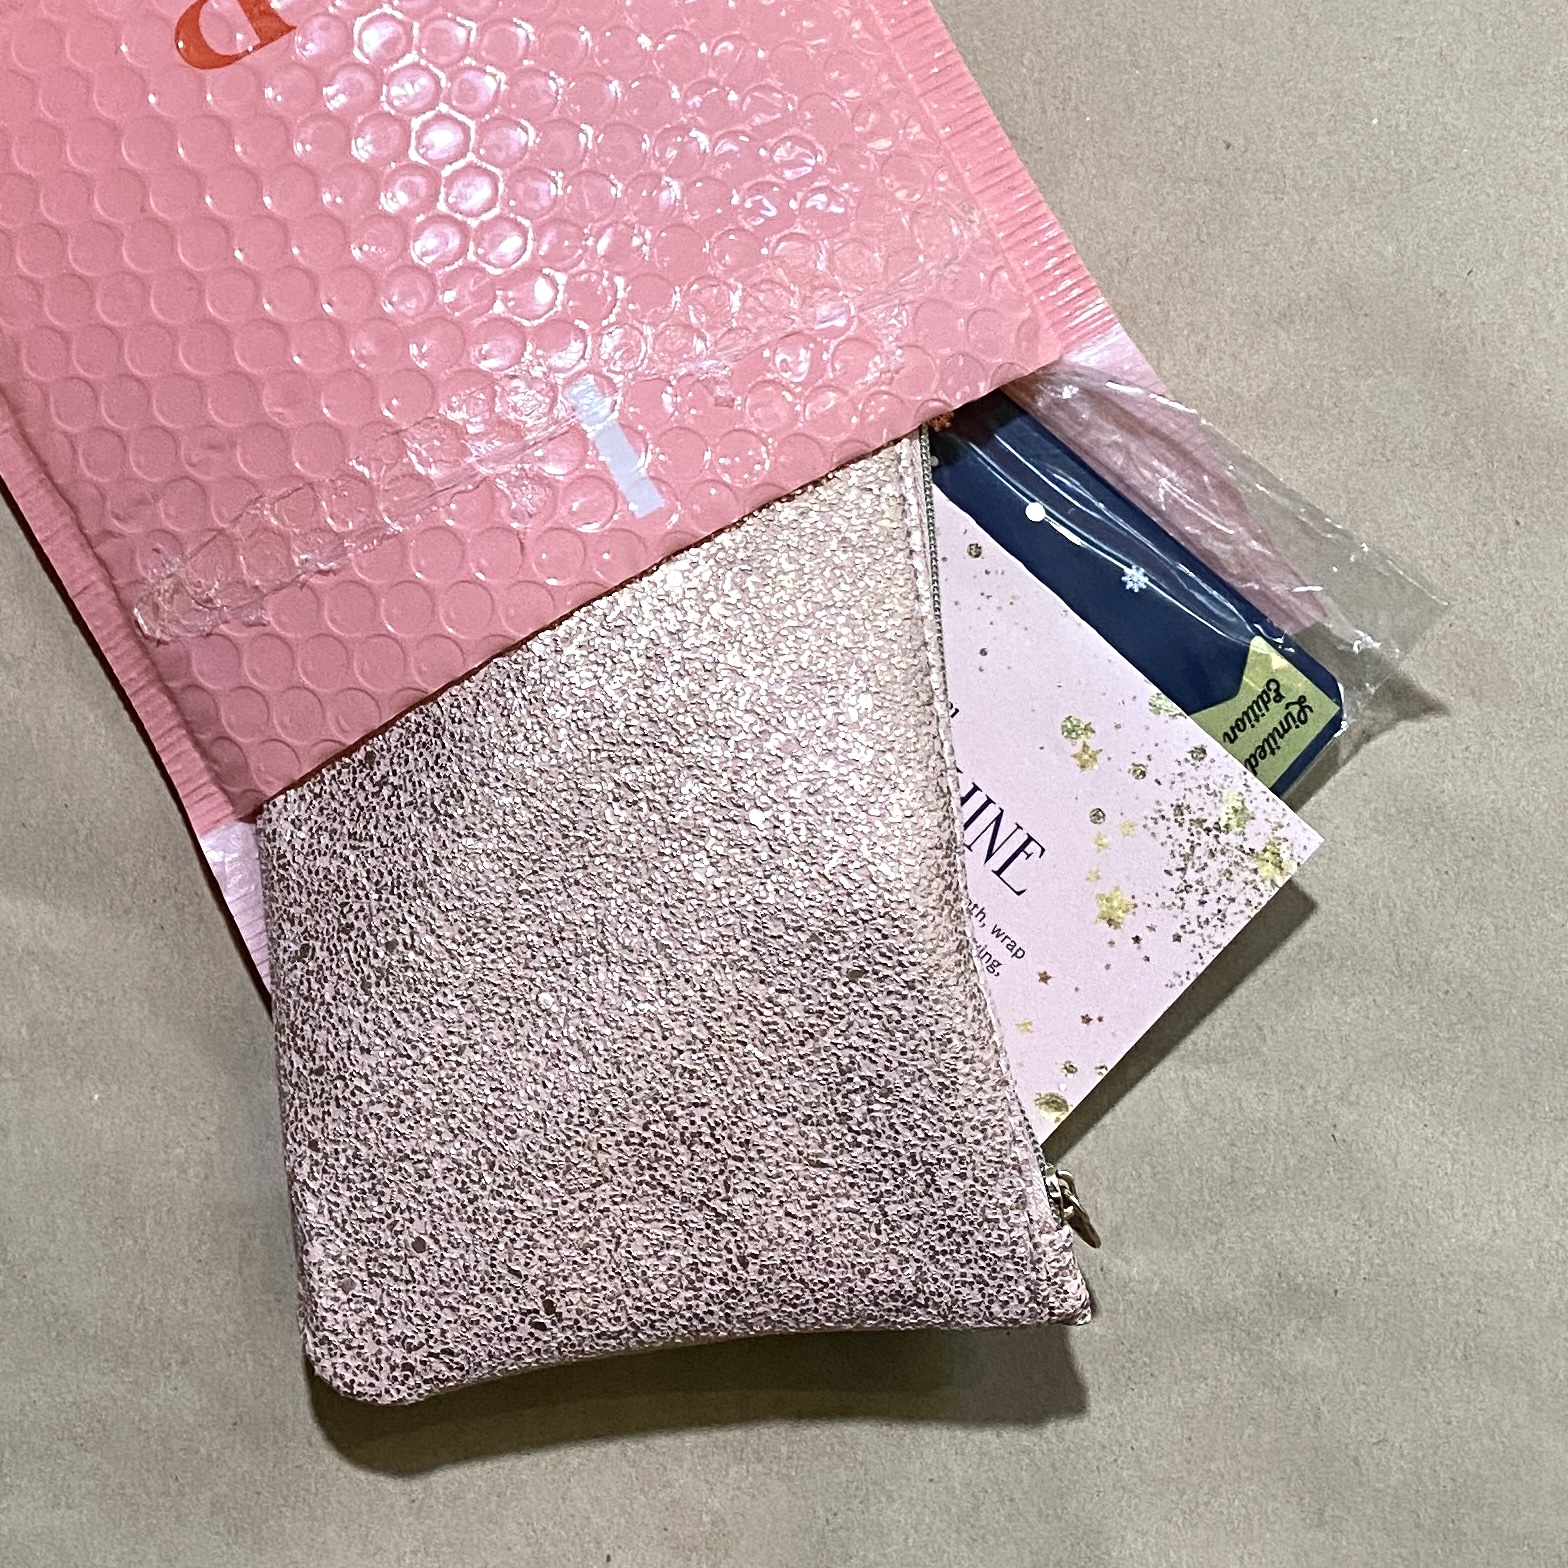 IPSY Glam Bag December 2021 Review: FIRST AID BEAUTY, THE CRÉME SHOP, and More!